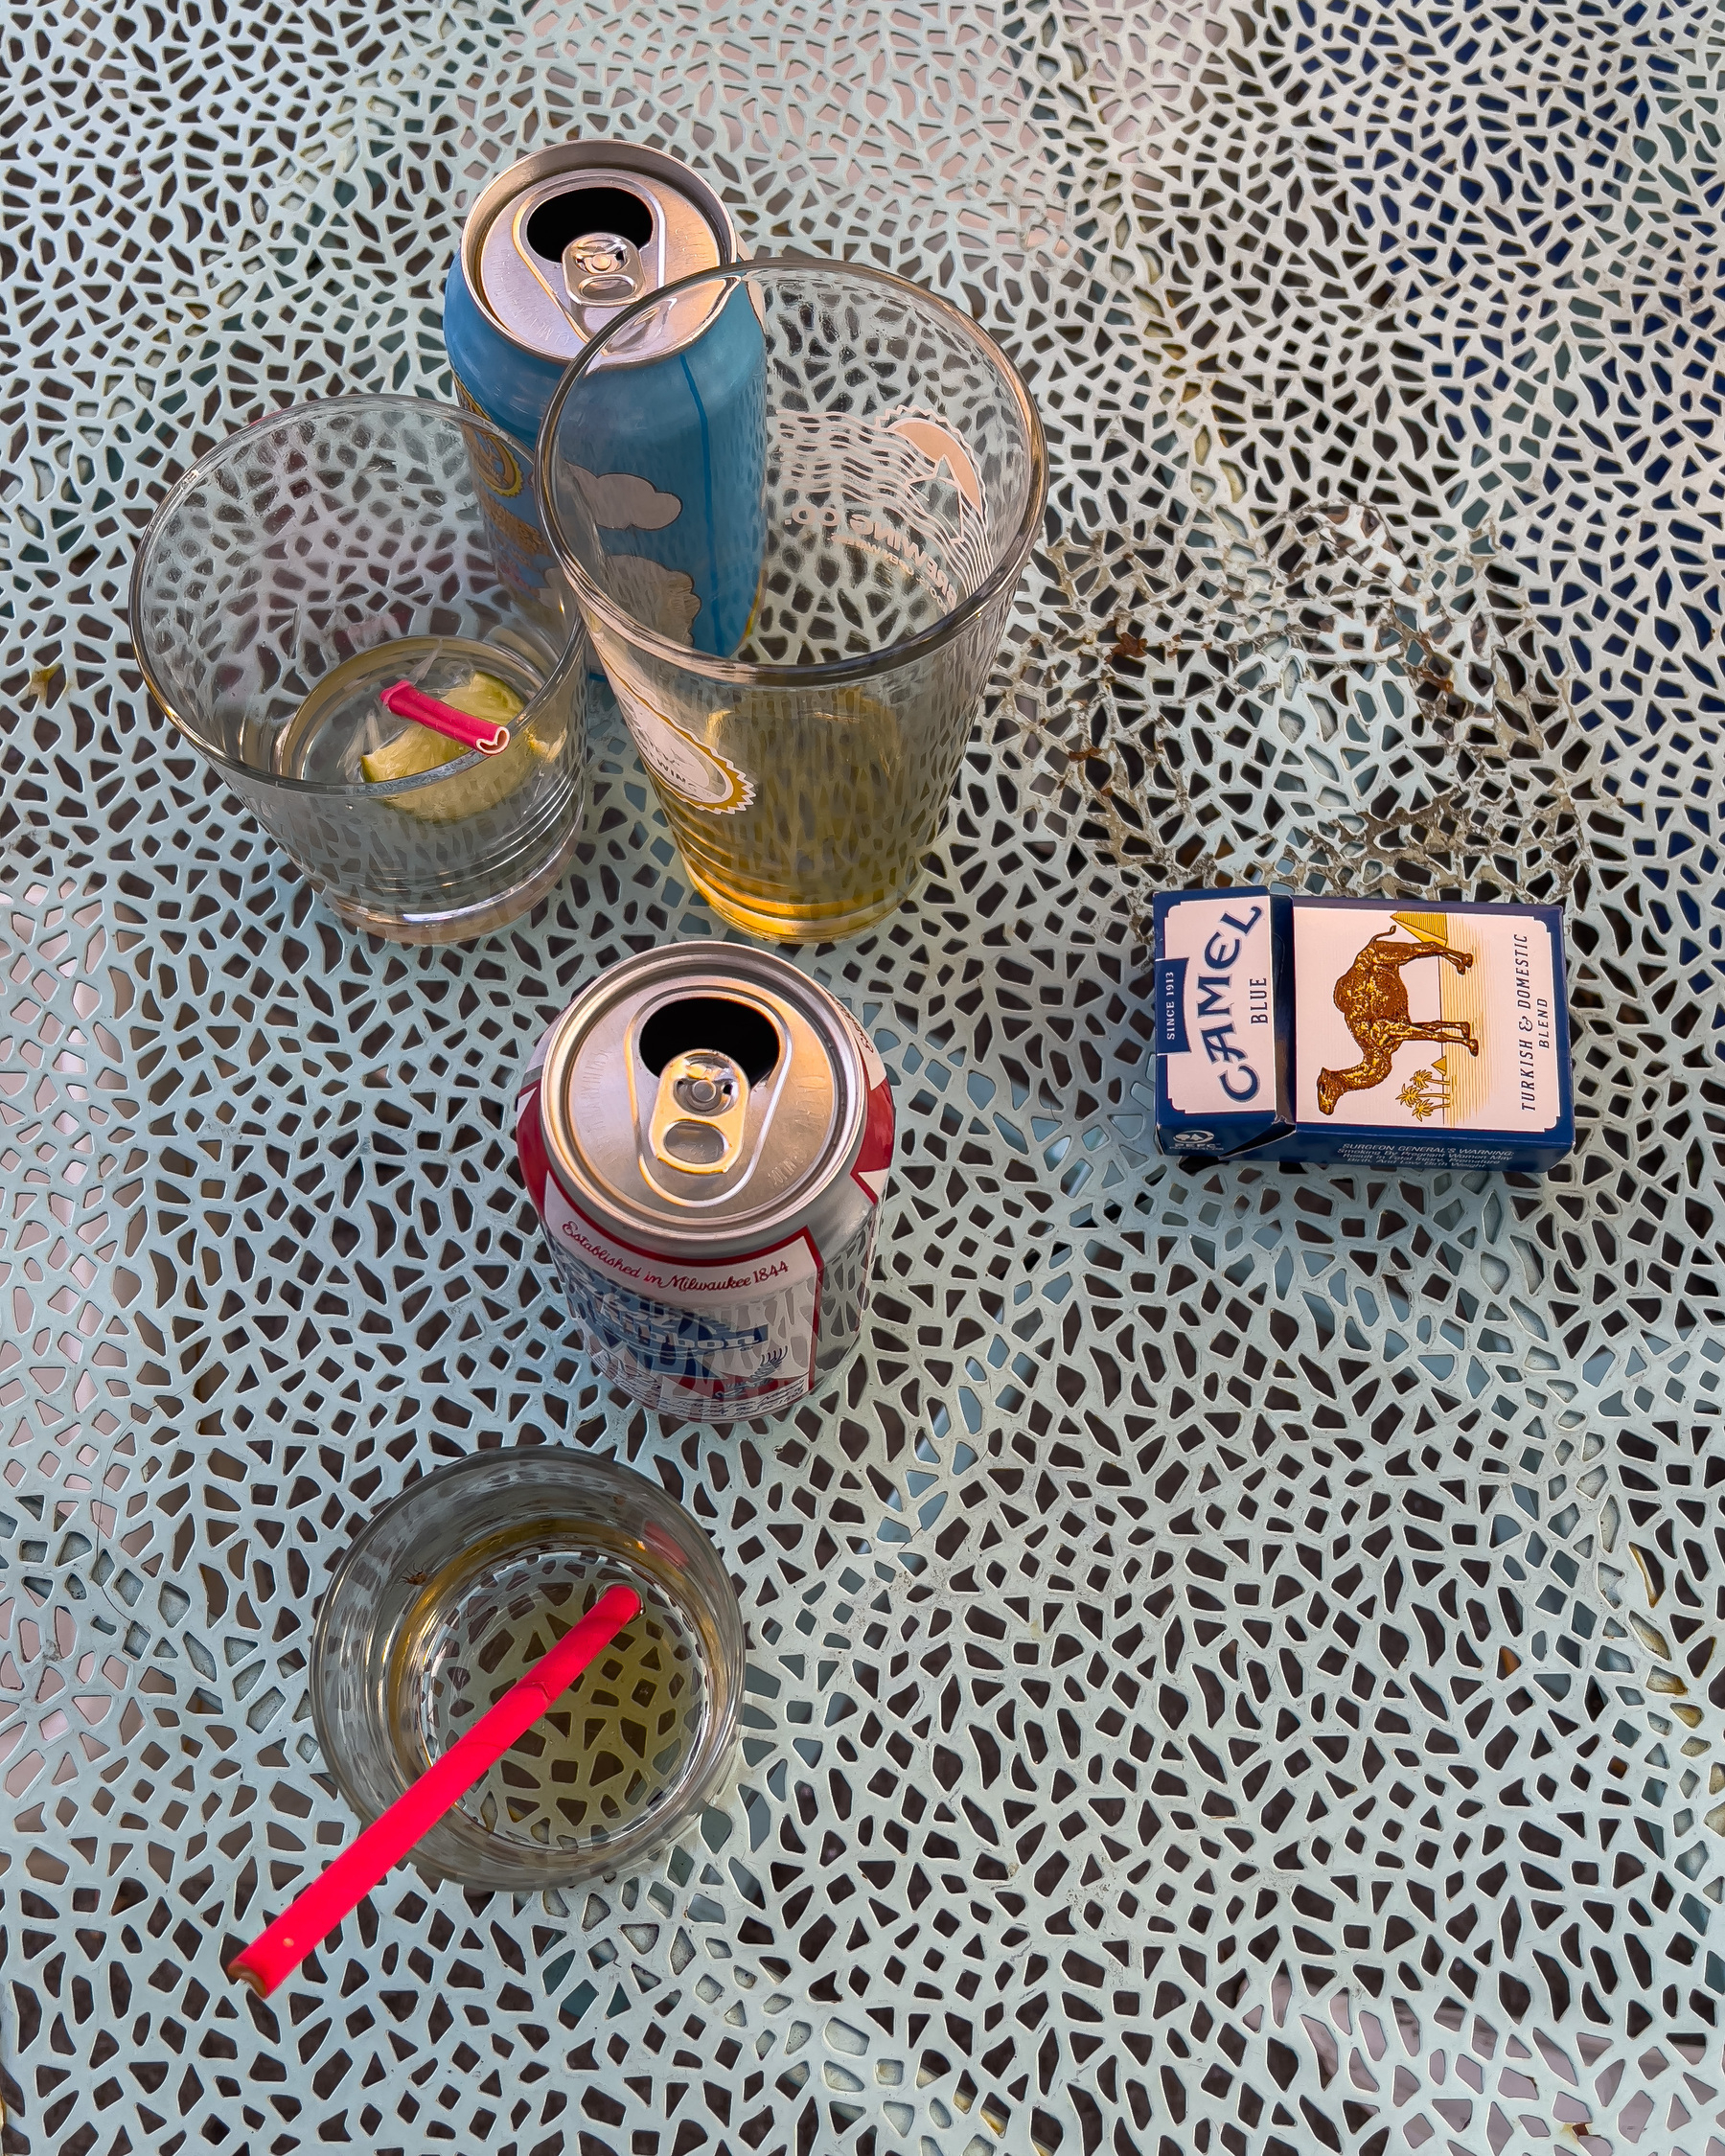 Glasses, cans and cigarette pack on a metal mesh table.